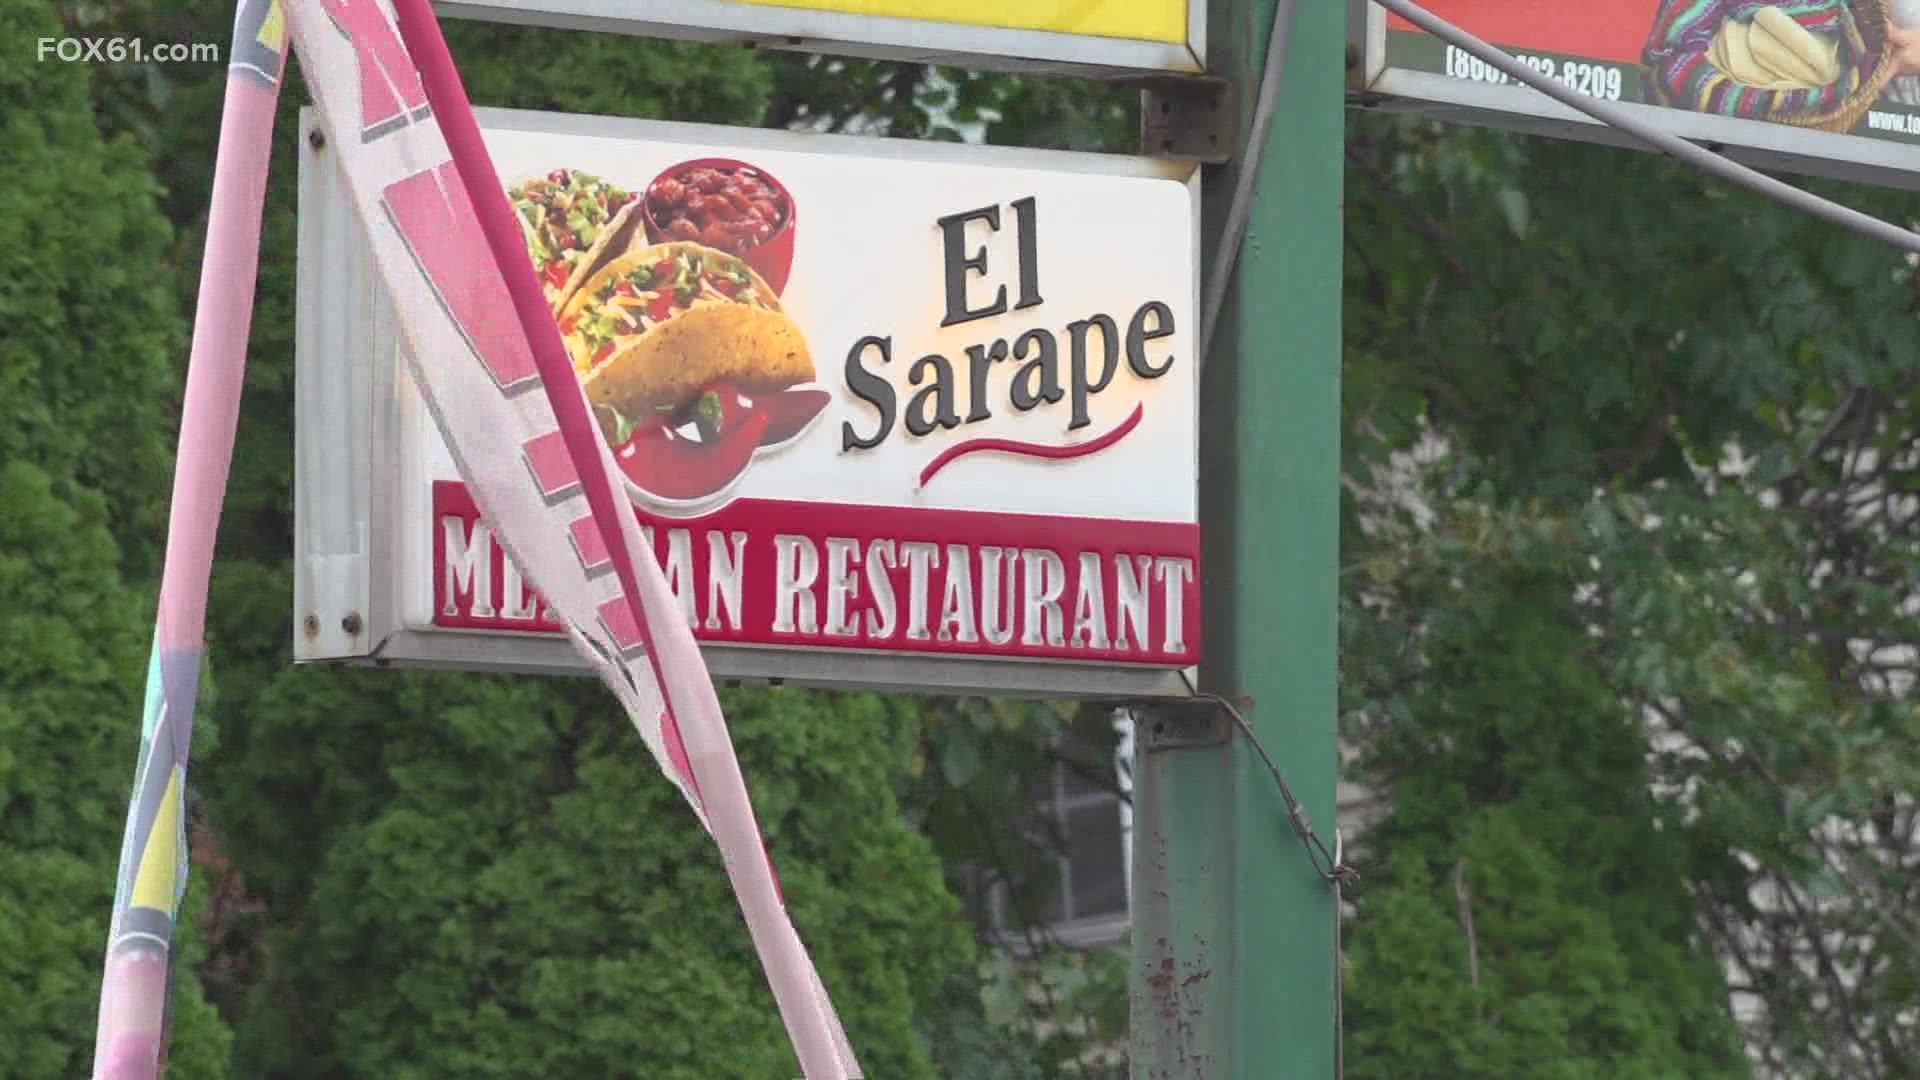 For over a decade, El Sarape Restaurant has been serving authentic Mexican food.